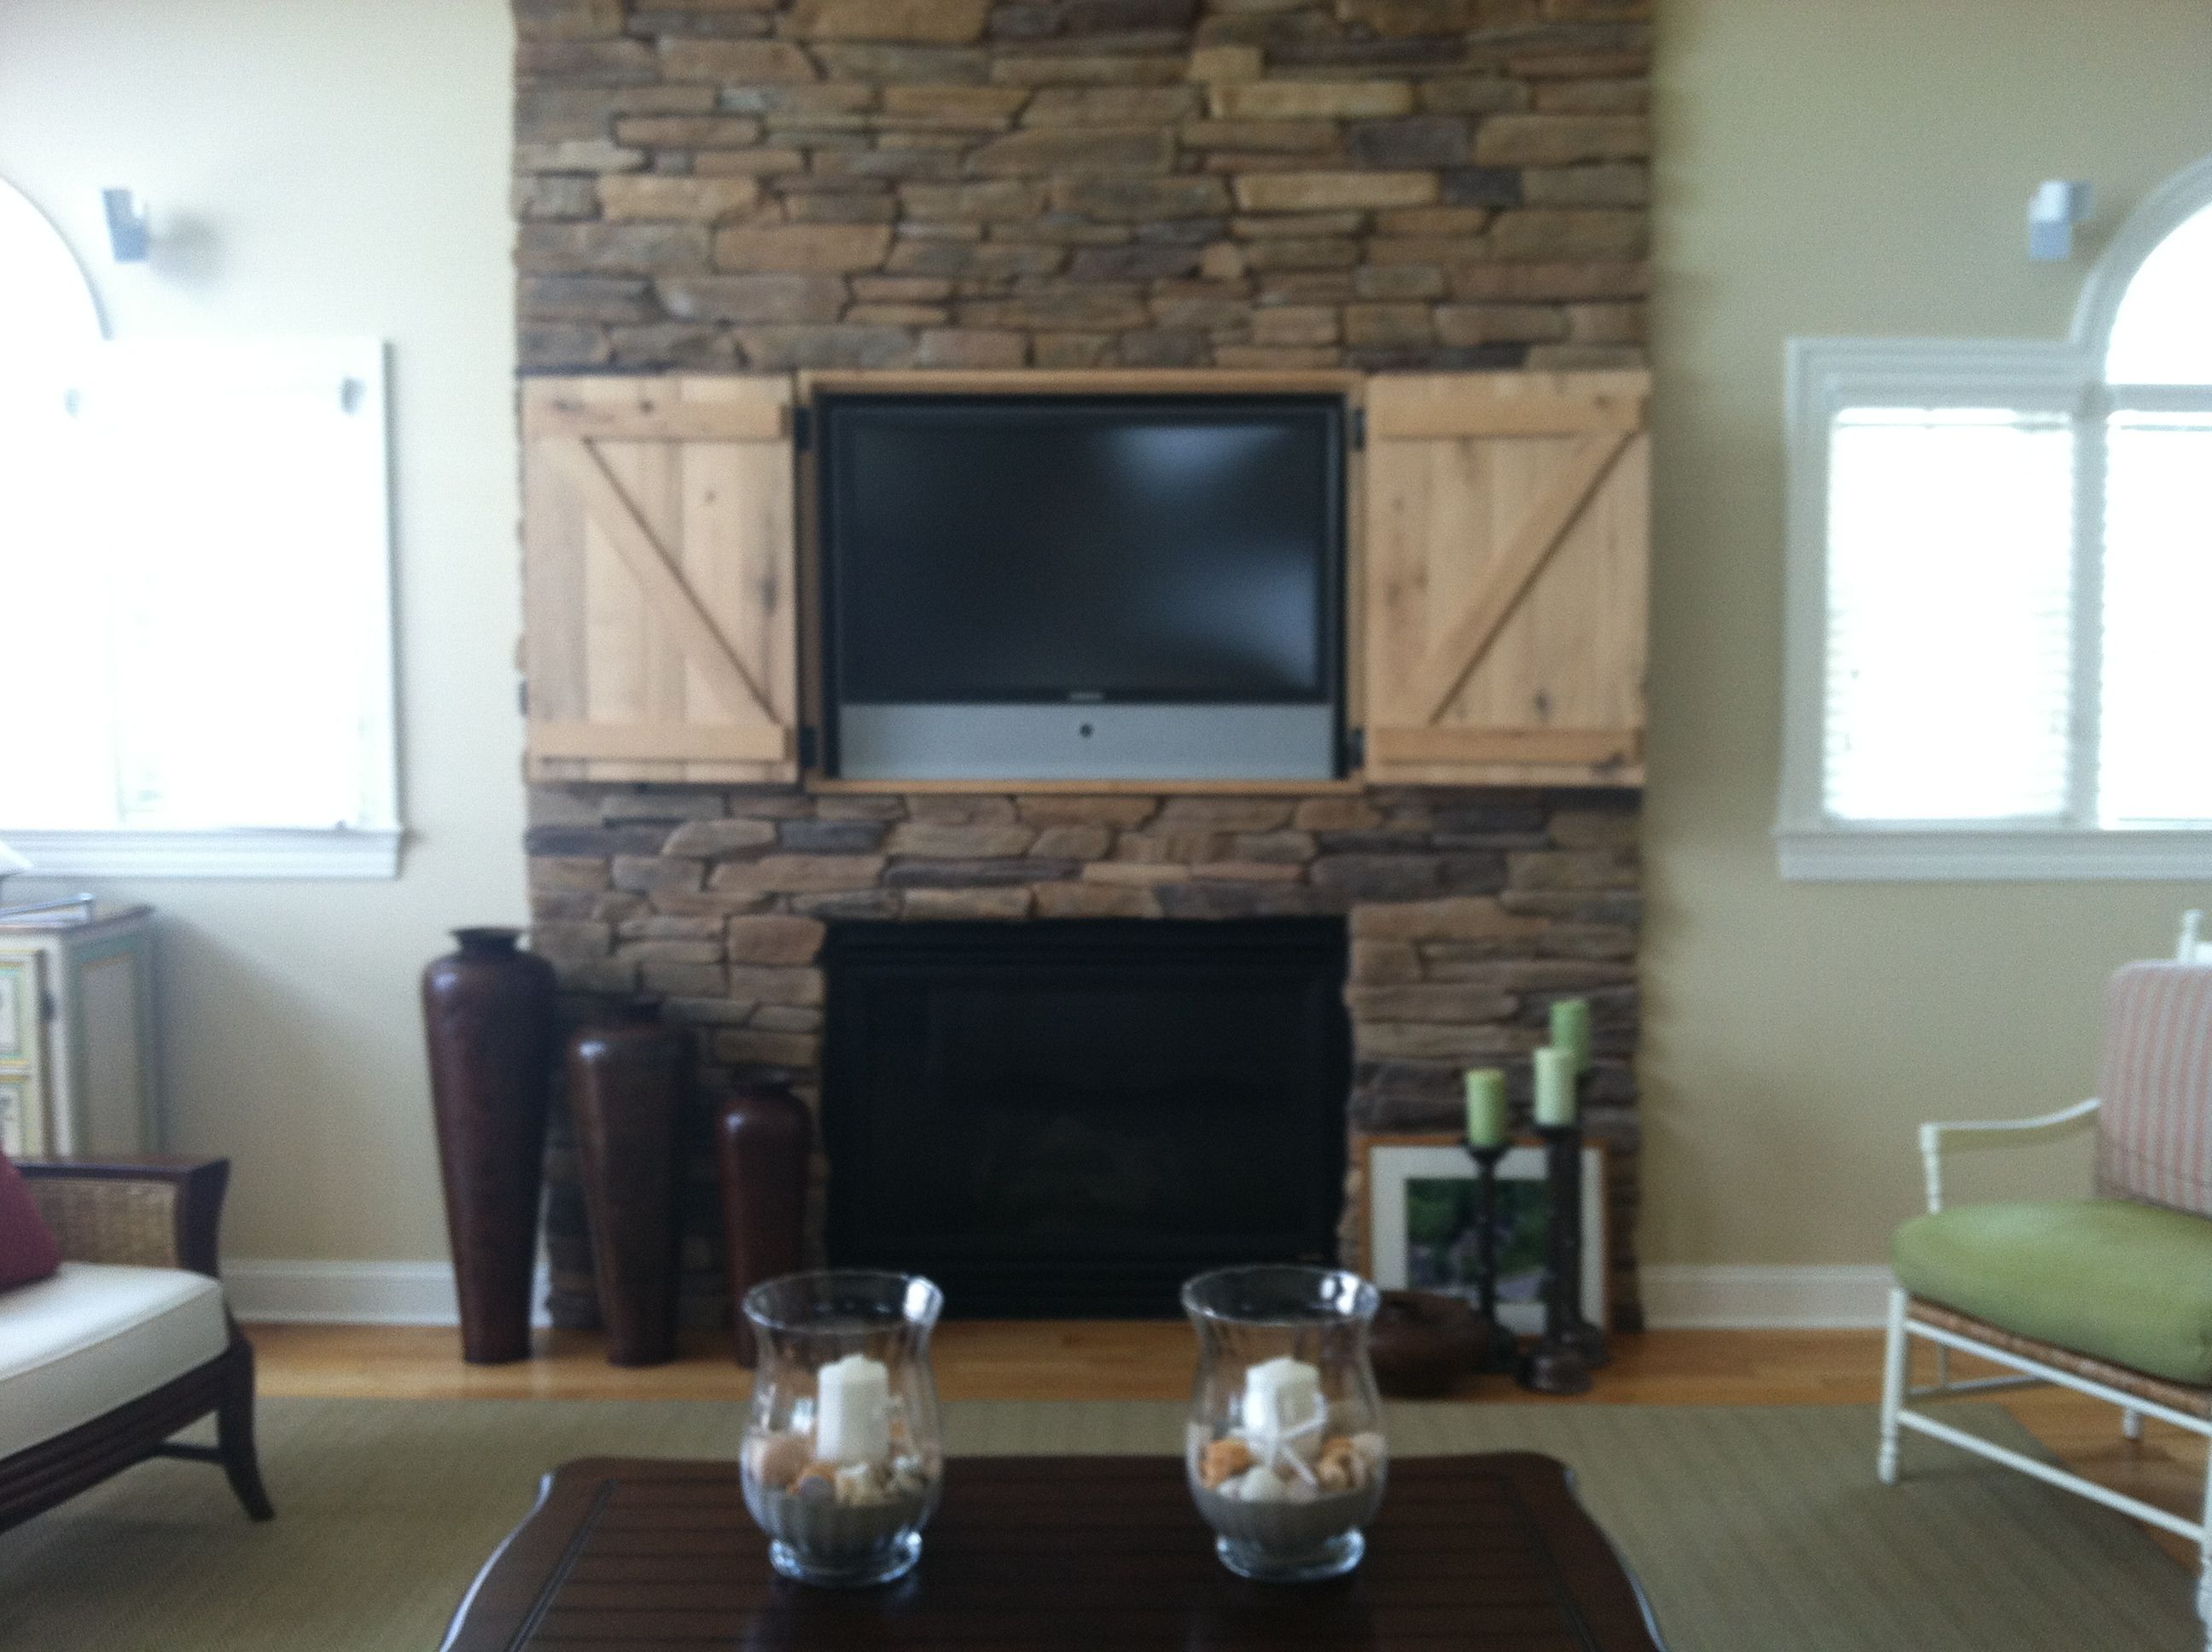 Where to Put Tv In Living Room with Fireplace Fresh Hidden Tv Over Fireplace Open Doors Decor and Design